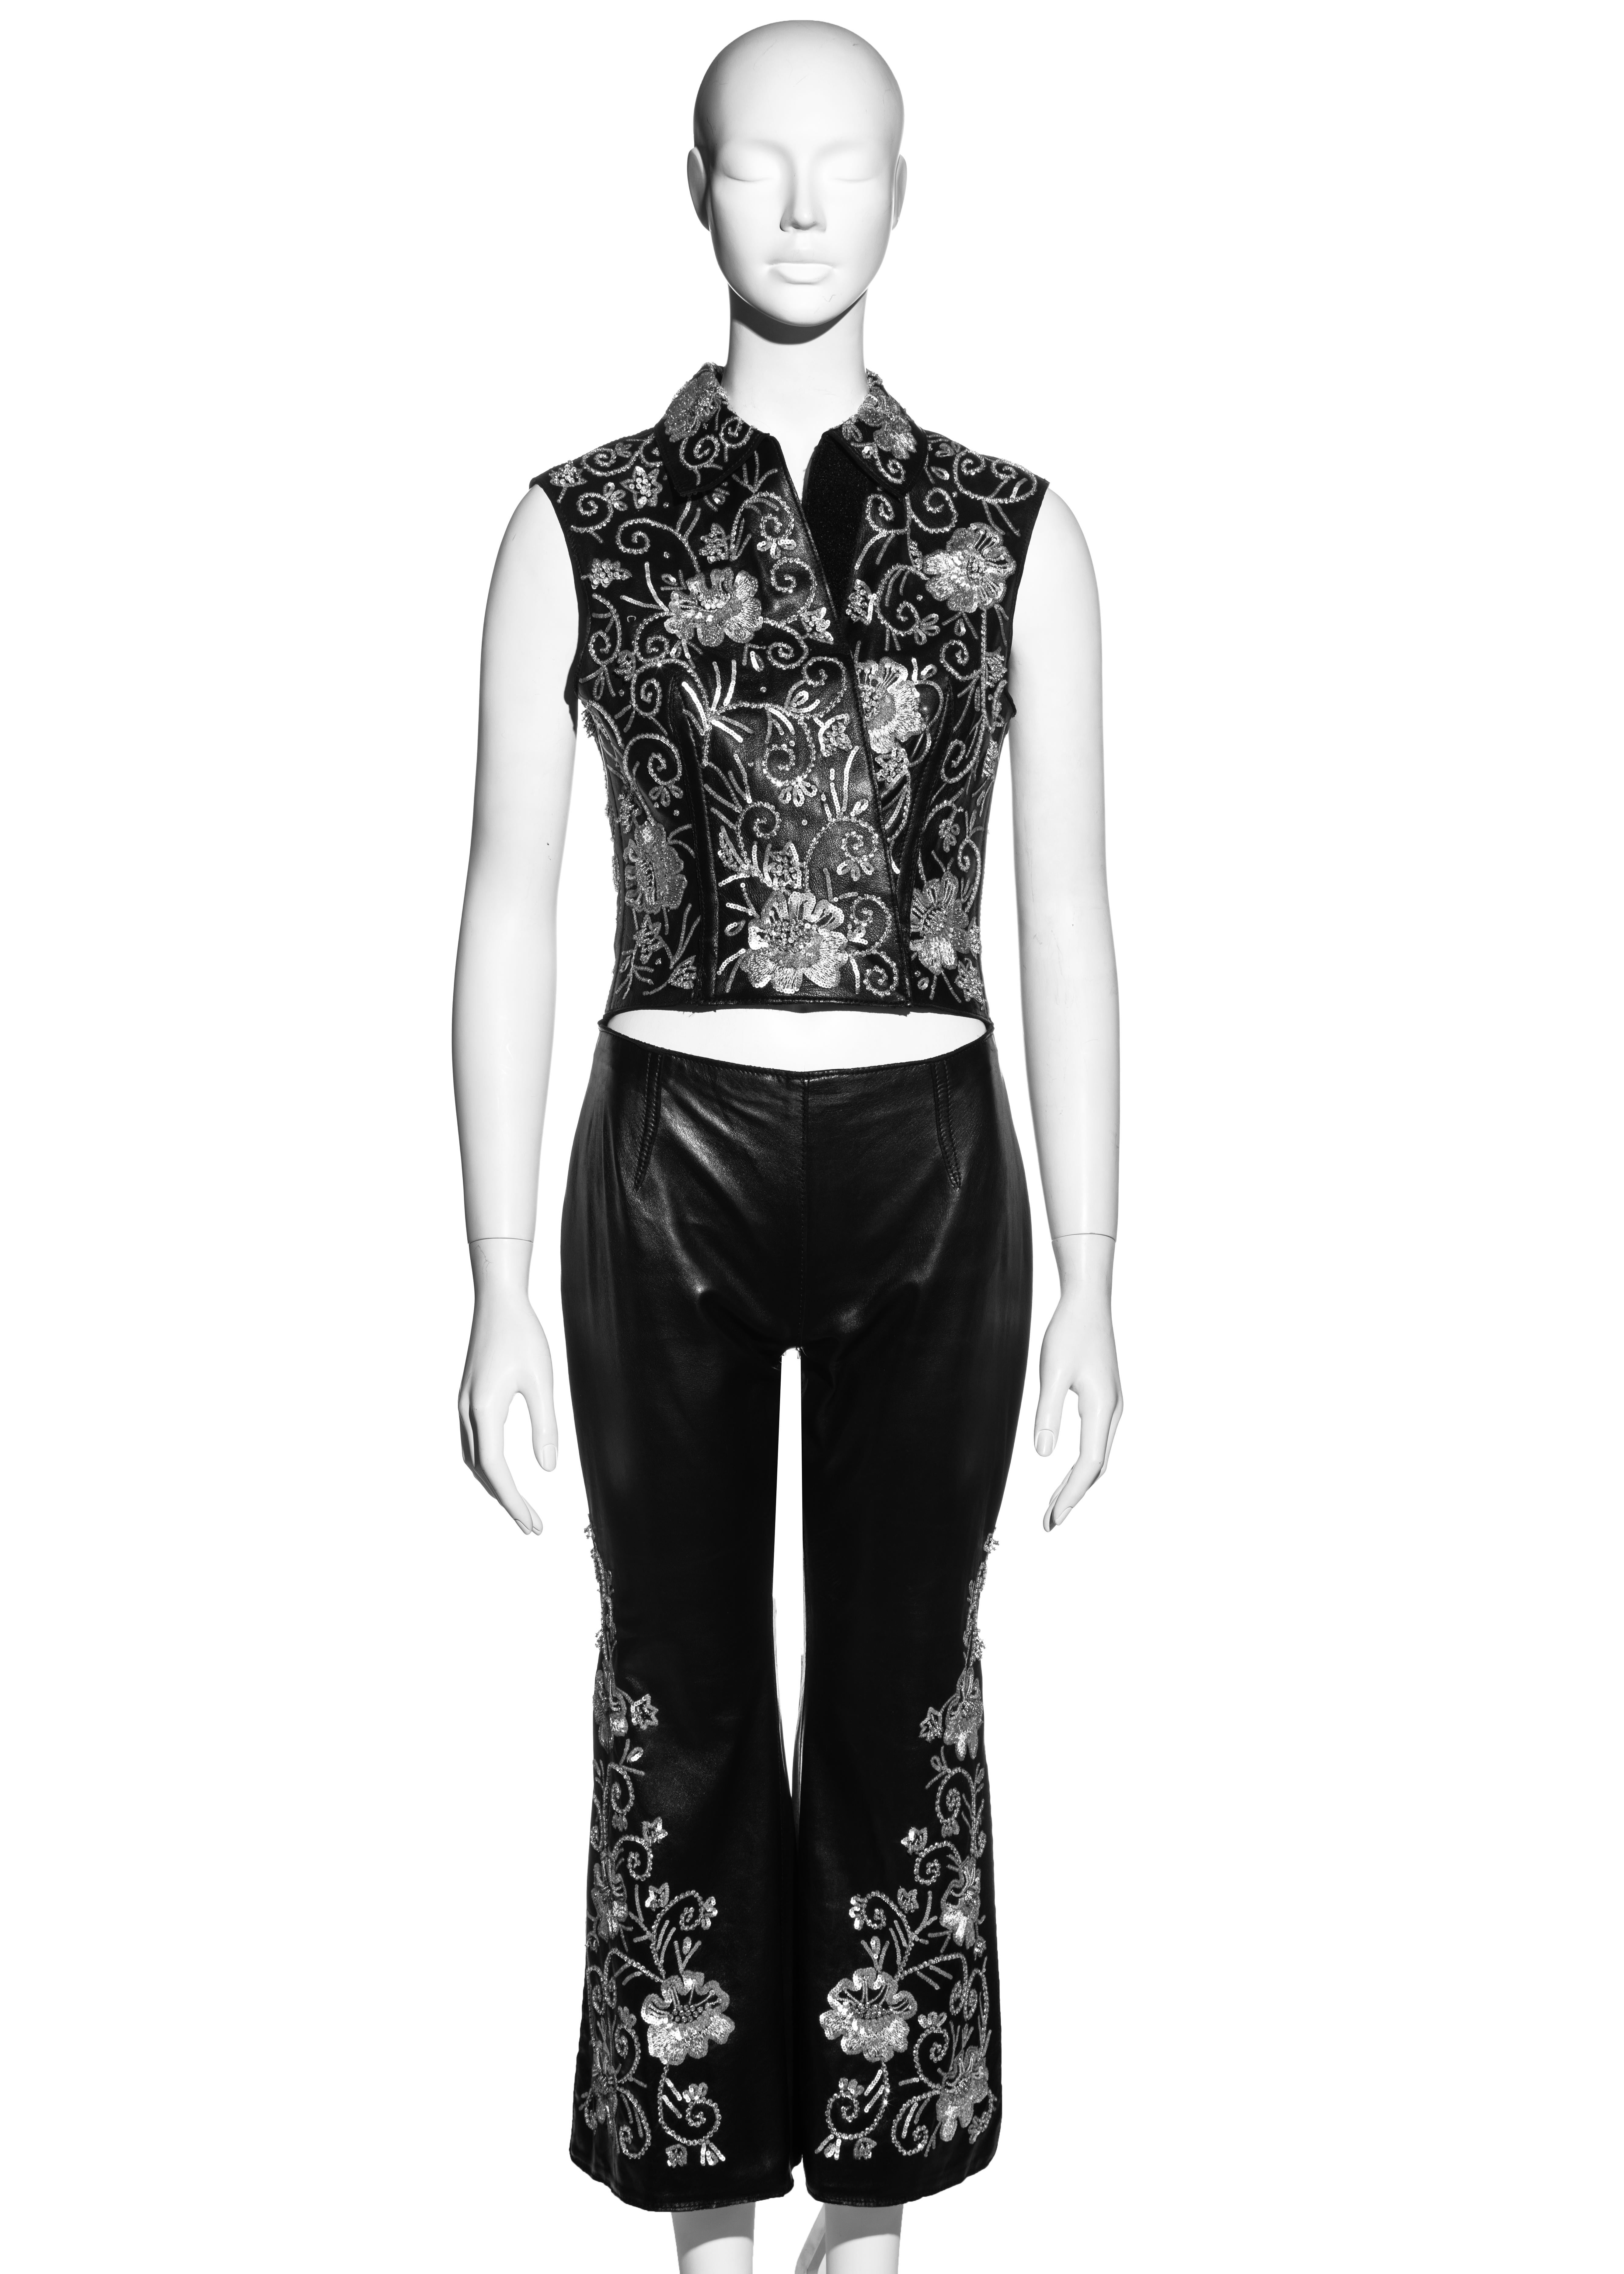 ▪ Dolce & Gabbana black leather pant suit 
▪ 100% Leather
▪ Floral themed silver embellishment and embroidery 
▪ Front velcro fastening on vest 
▪ Leg slits on pants 
▪ IT 40 - FR 36 - UK 8 - US 4
▪ Fall-Winter 1999